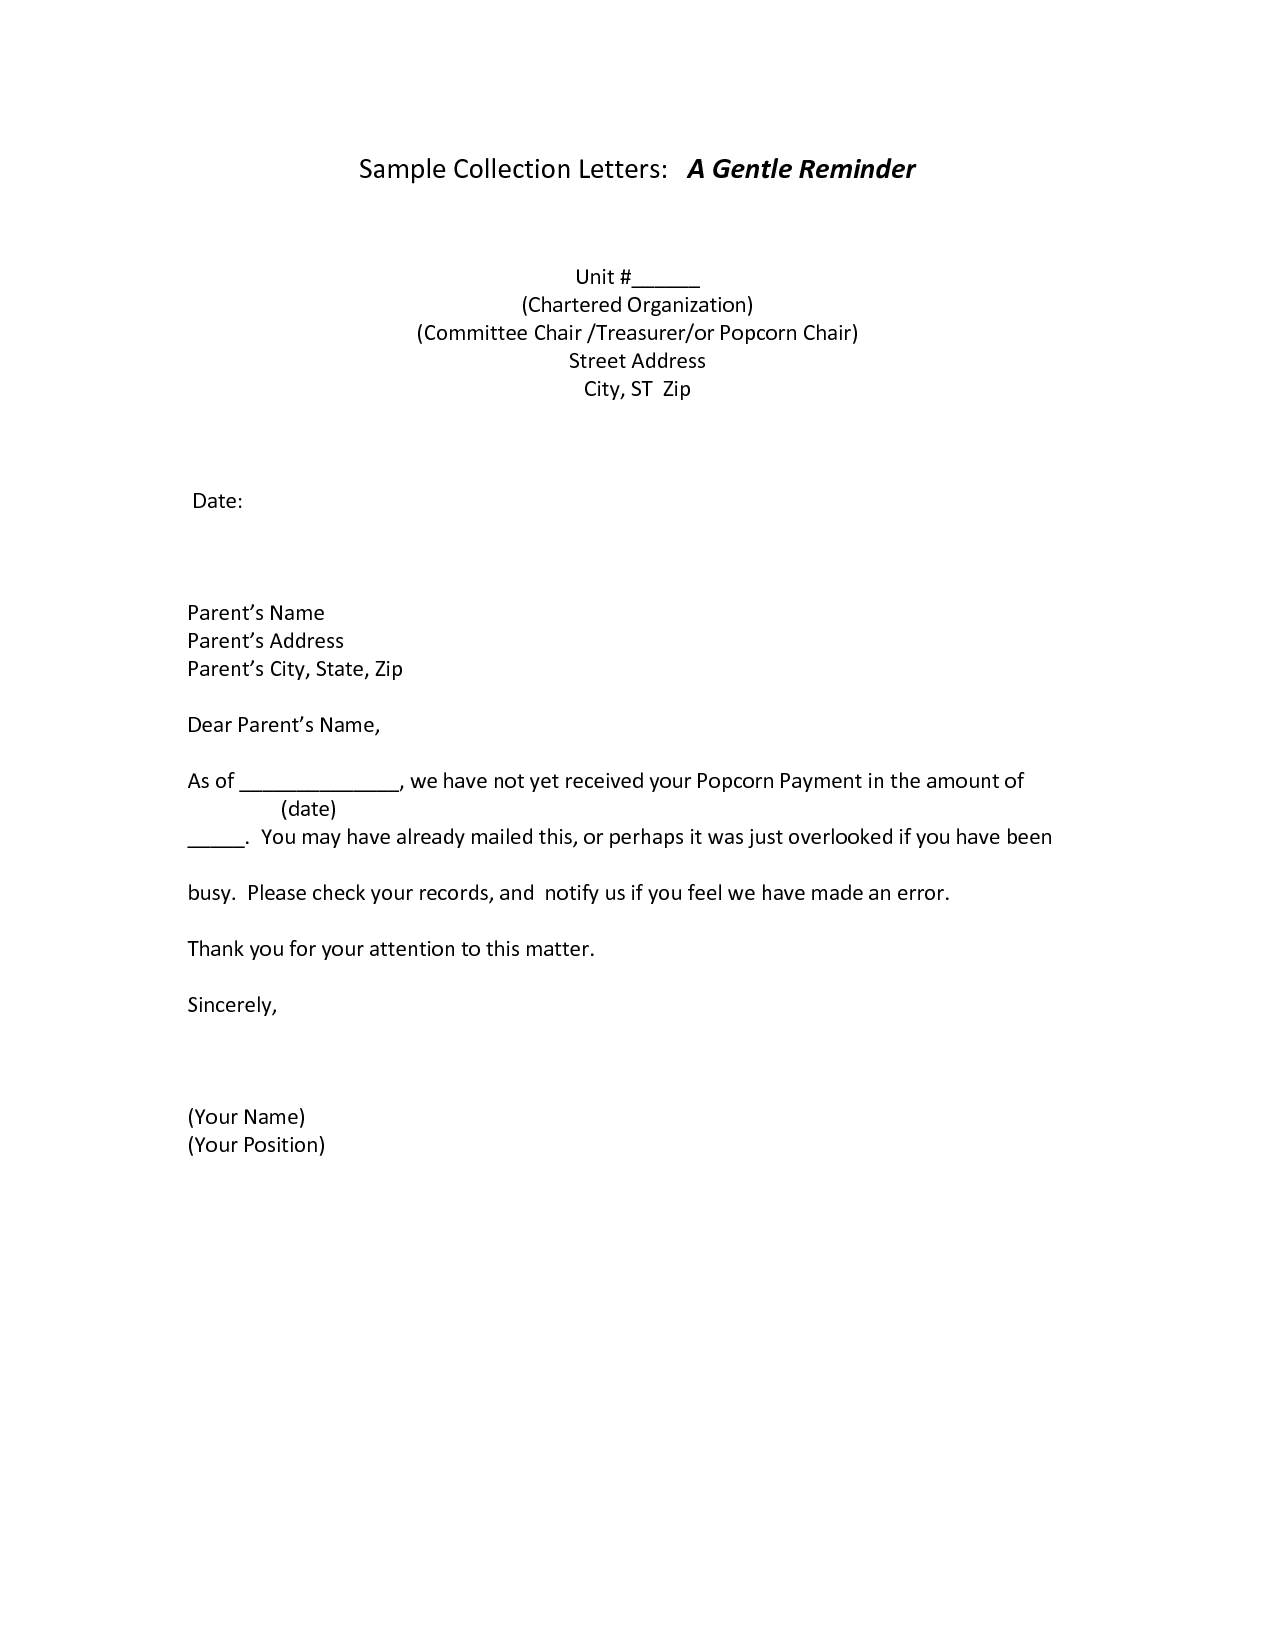 Appointment Letter Template 31+ Free Word, PDF Documents 